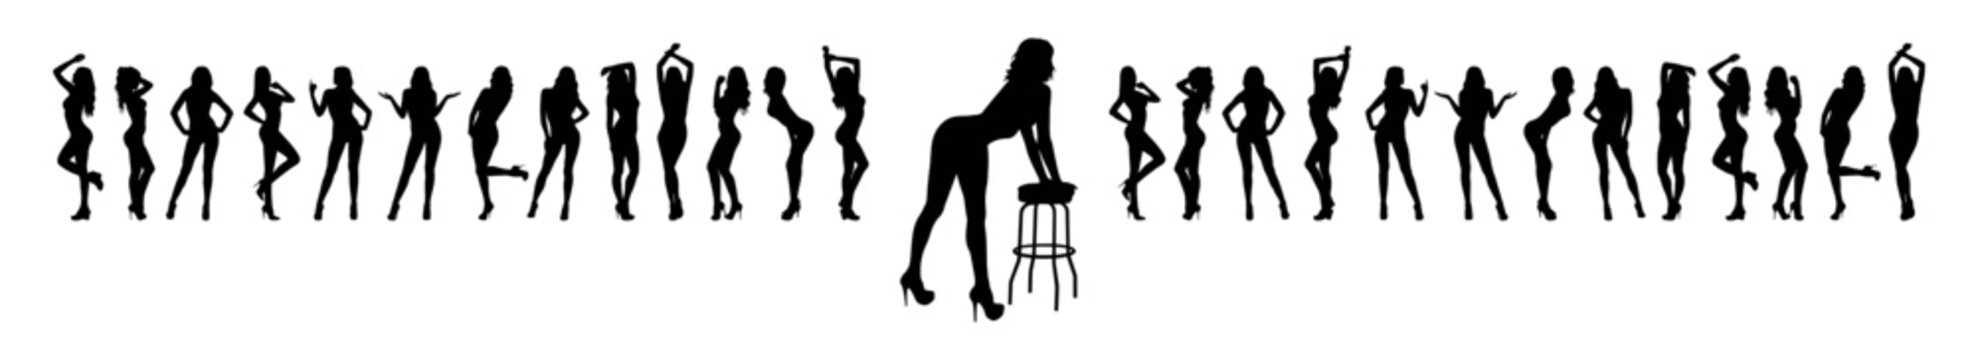 Sexy woman posing with bar chair in front of group of women models vector silhouette.